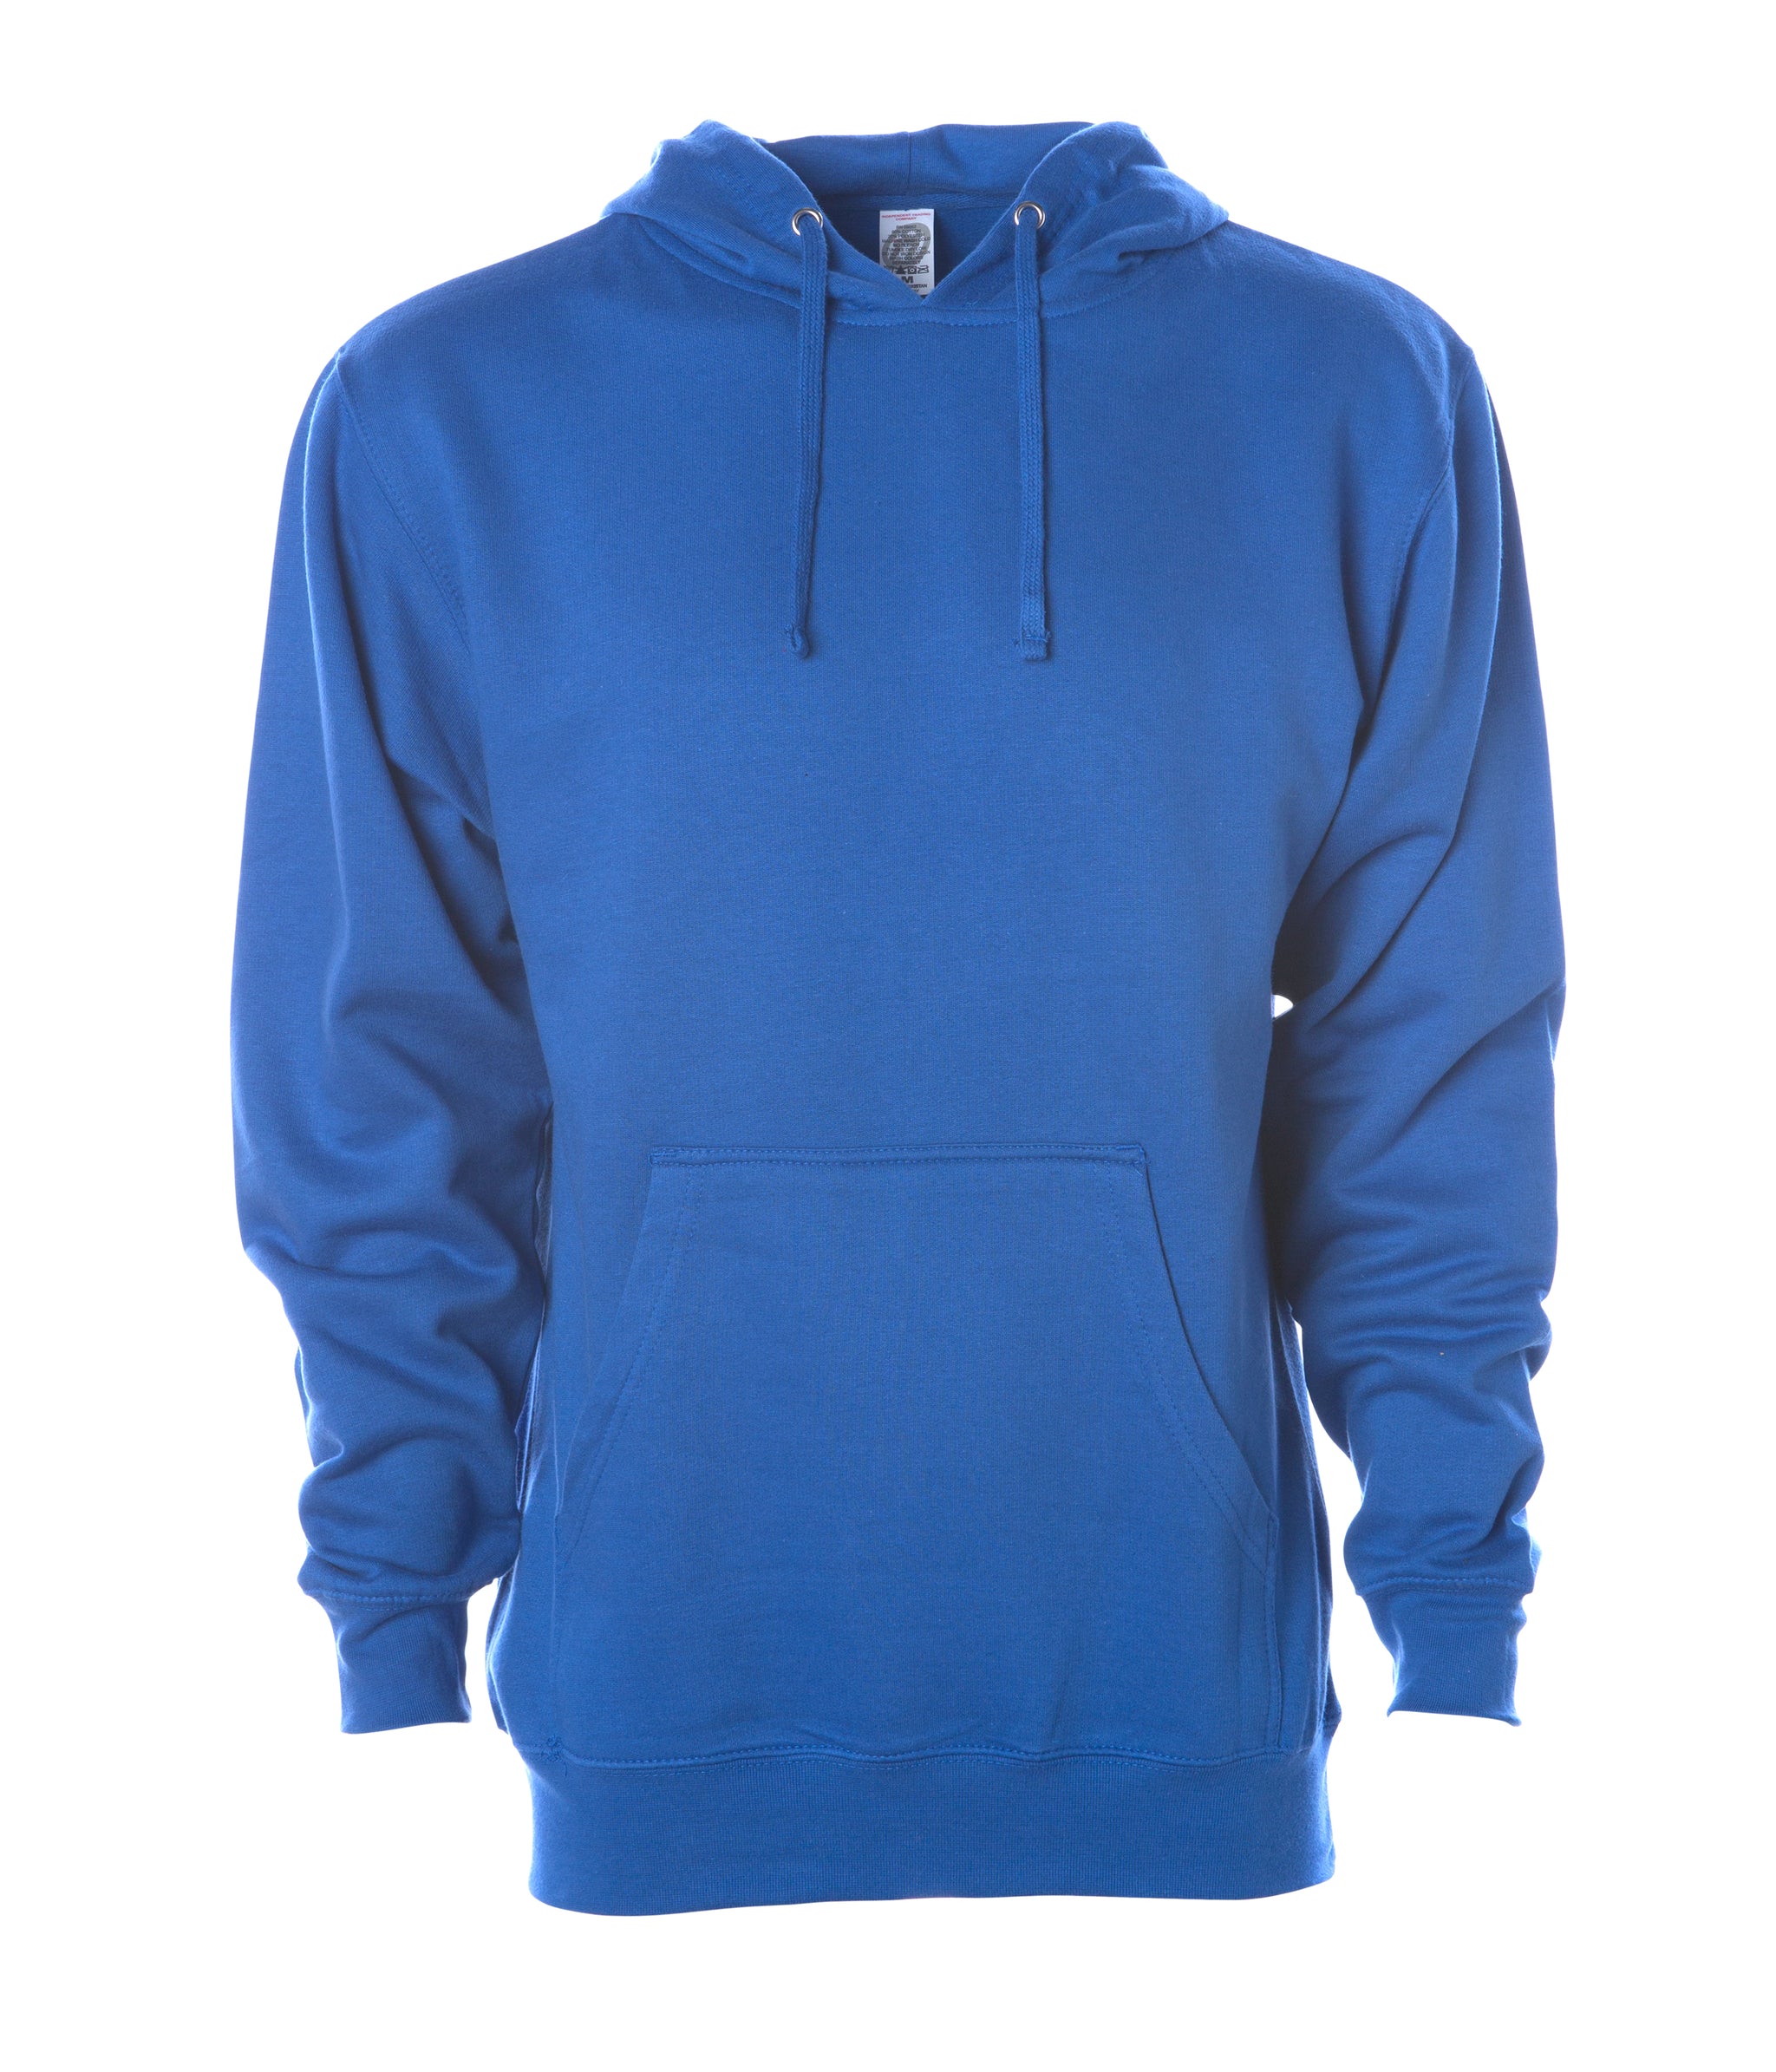 4XL & 5XL Midweight Hooded Pullover | Best Value Midweight Hoodie ...